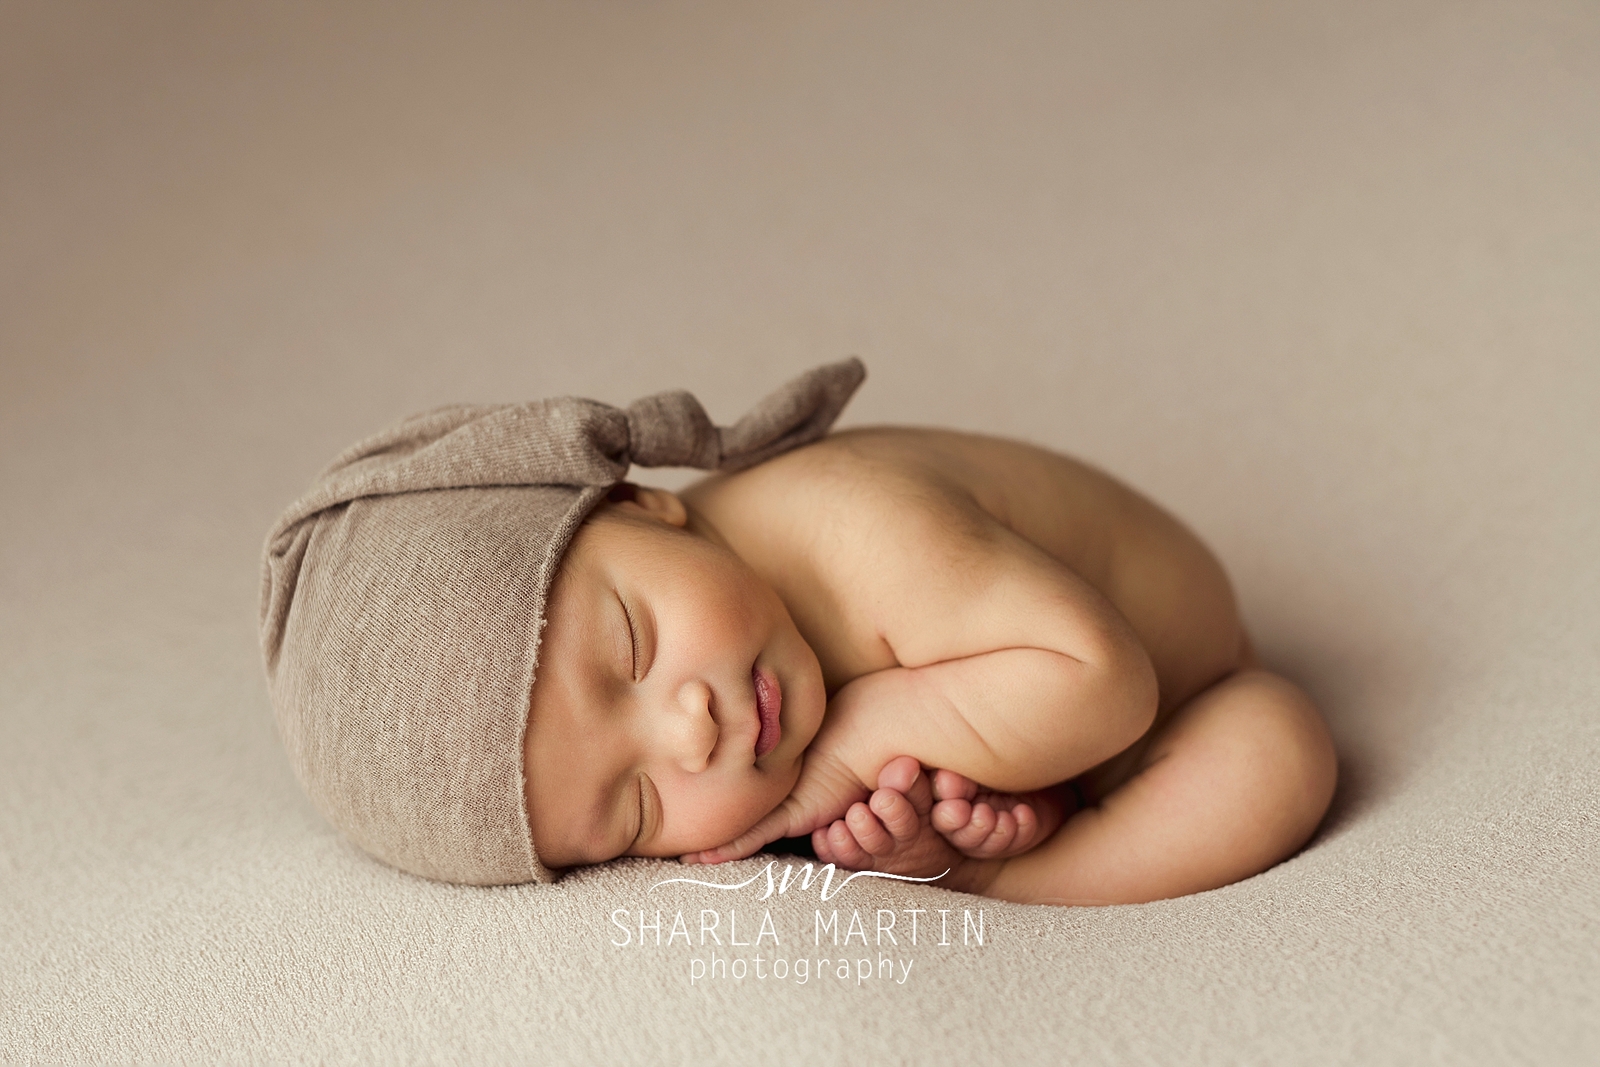 5 Poses and a baby: Behind the scenes of a newborn session